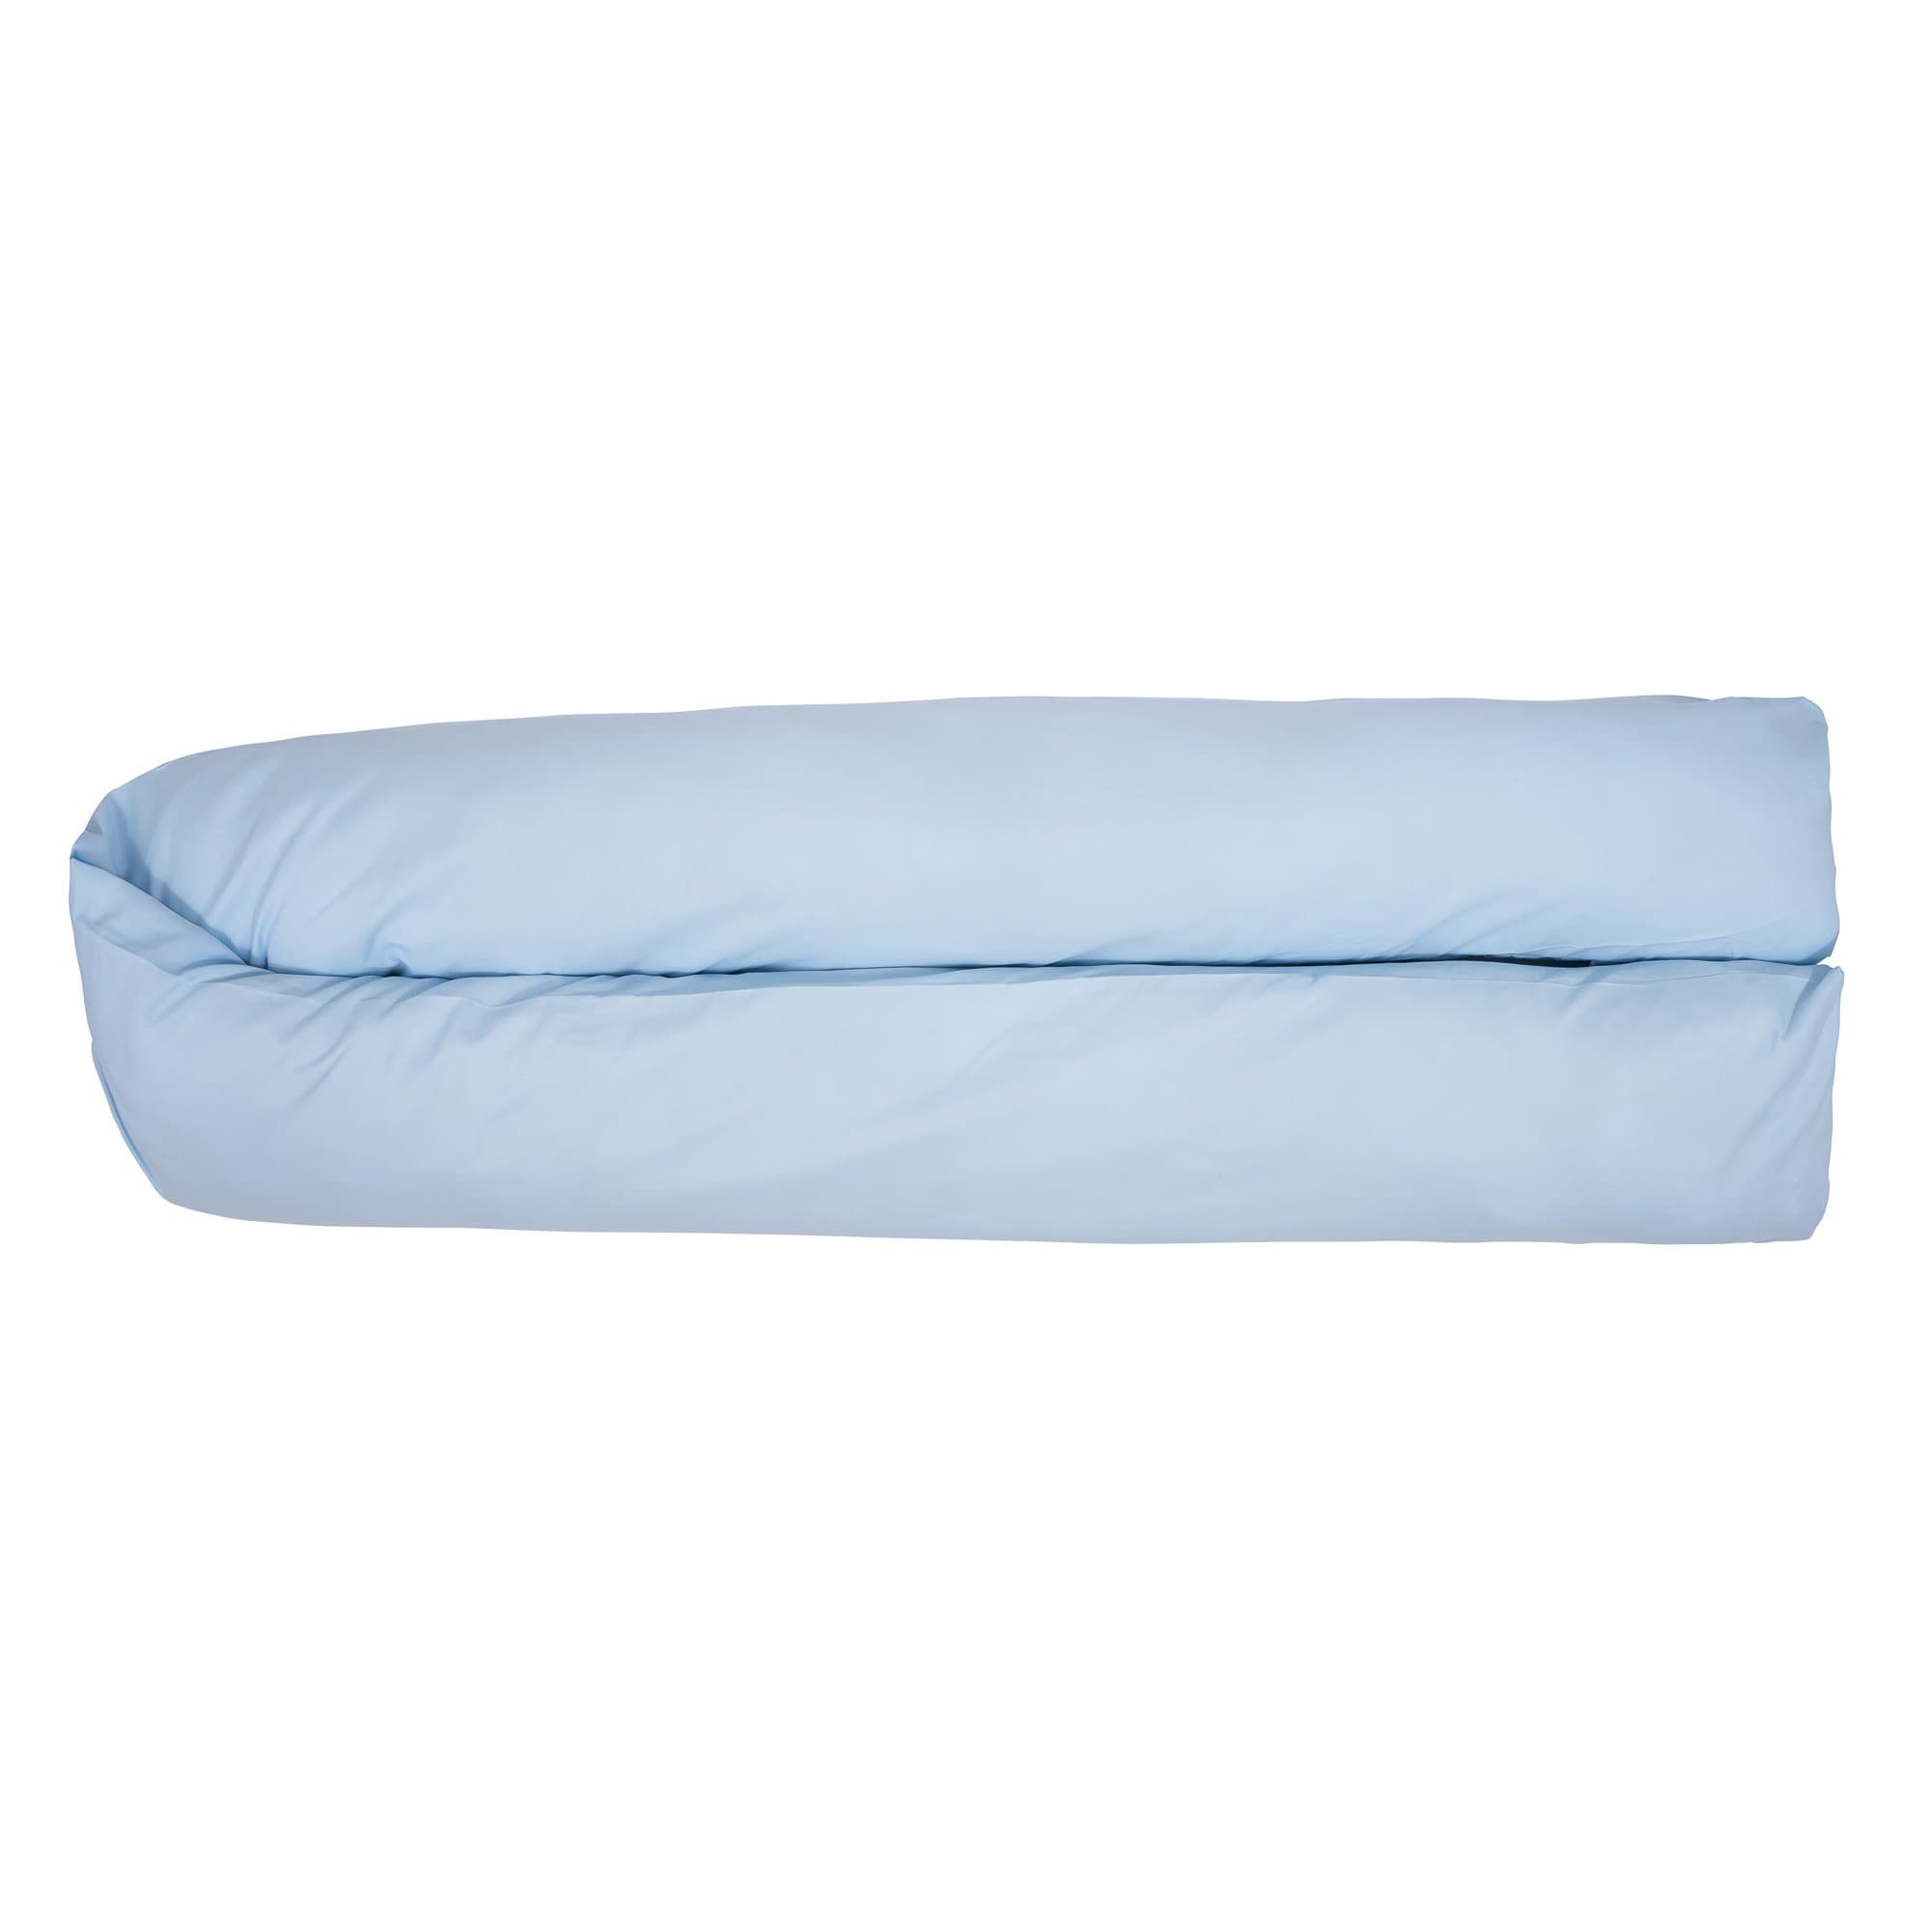 9 Ft Maternity Pillow And Case - Light Blue - For Your Little One